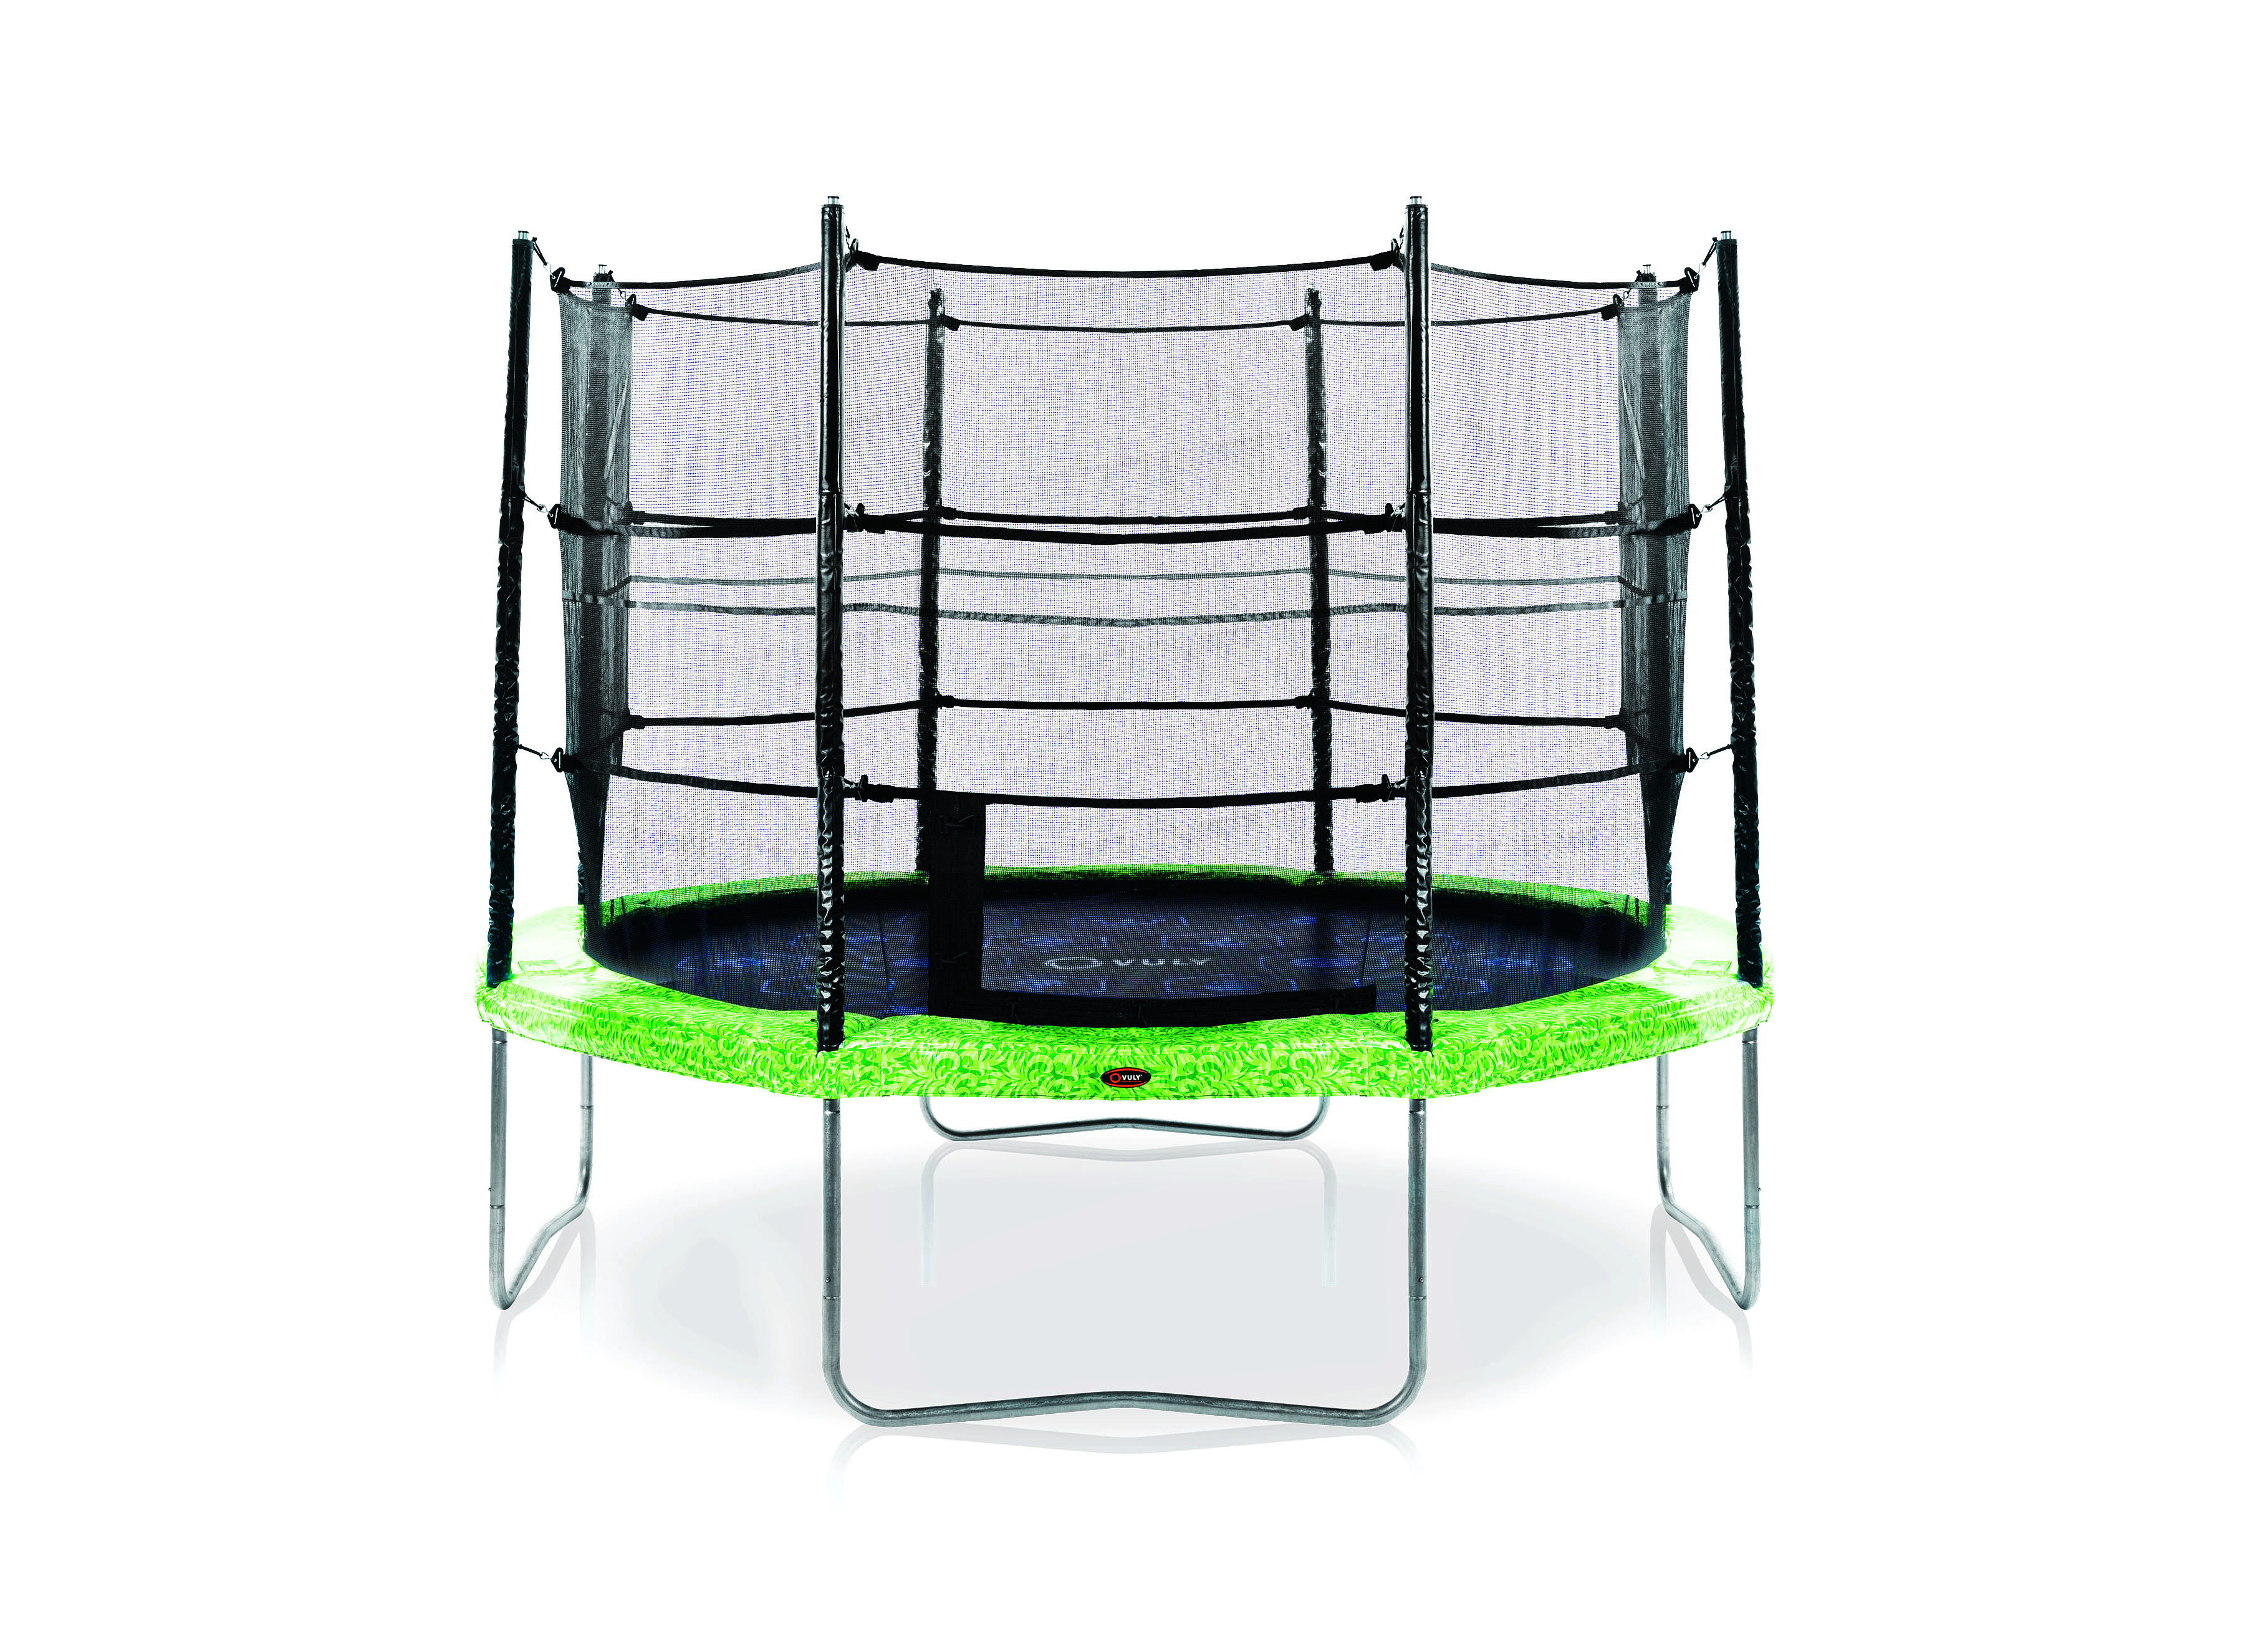 Different Types of Trampolines - Complete Guide